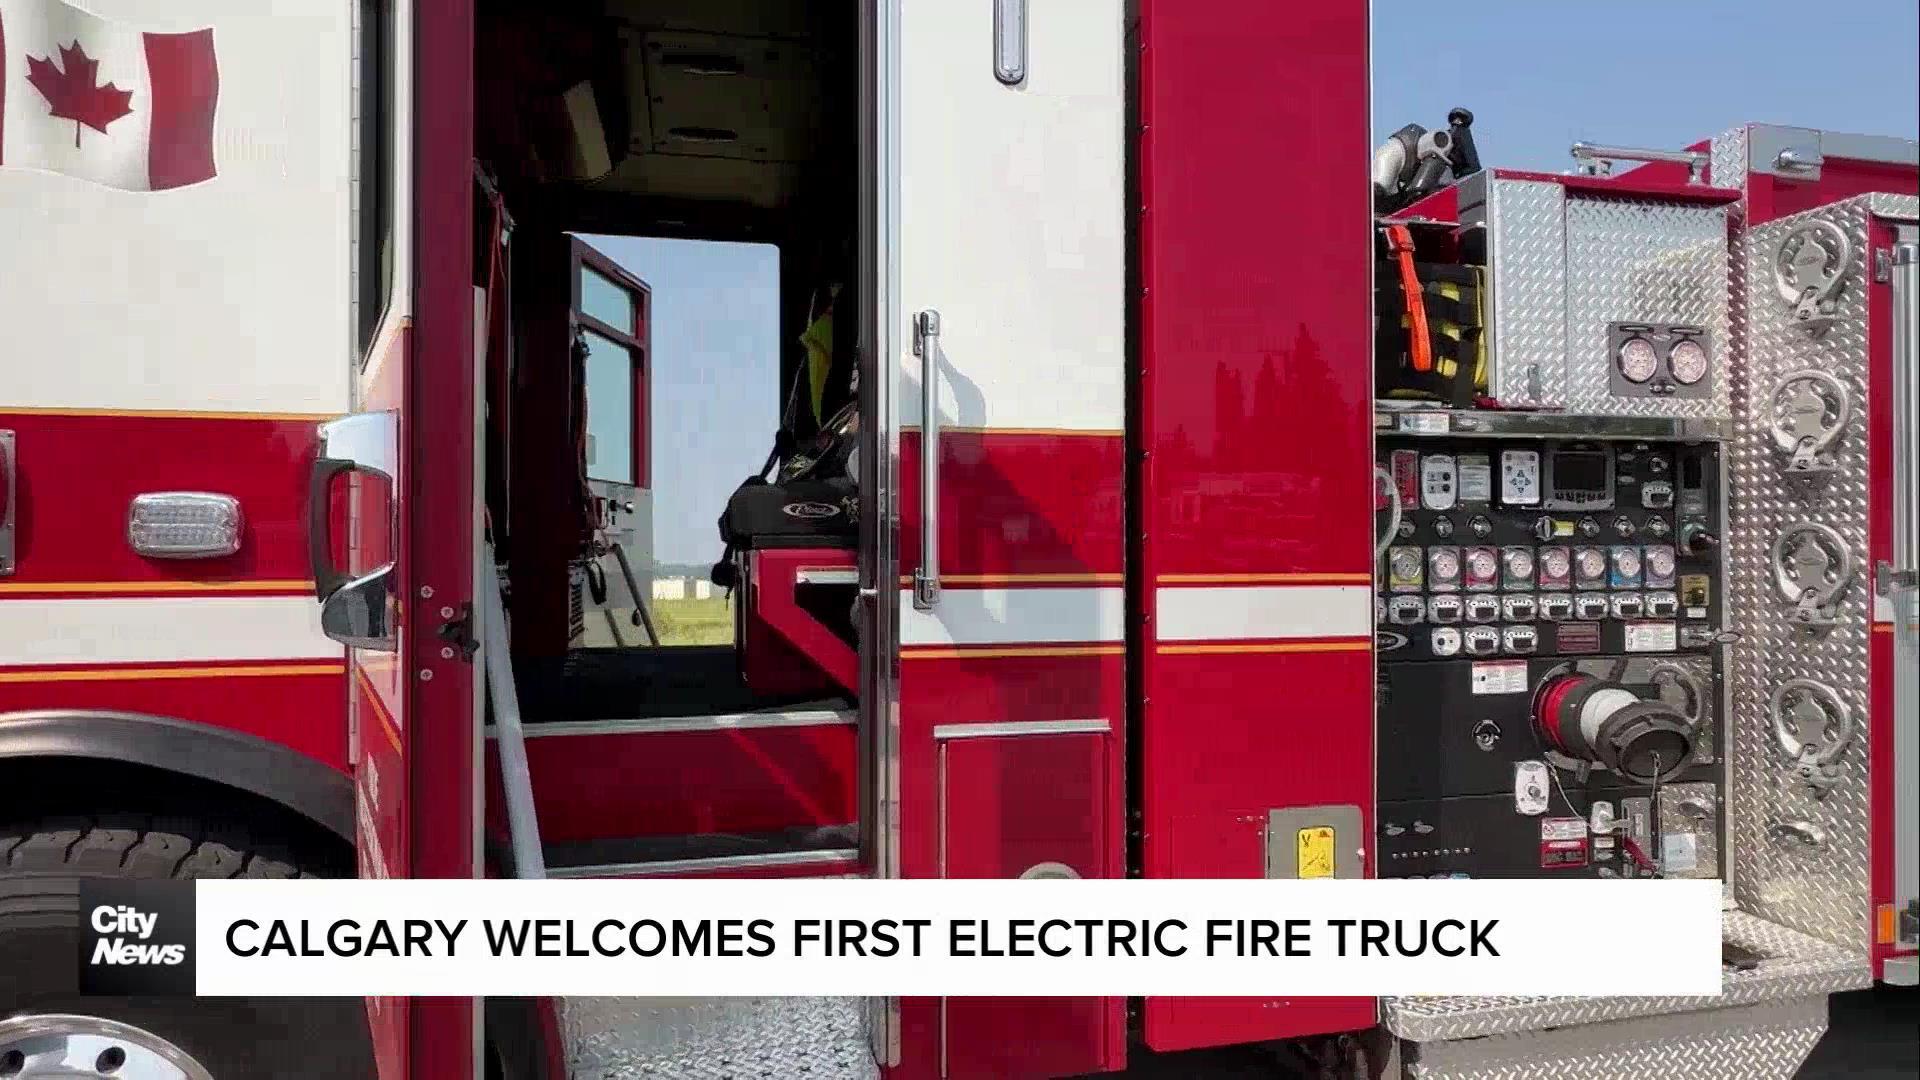 Calgary welcomes first electric fire truck